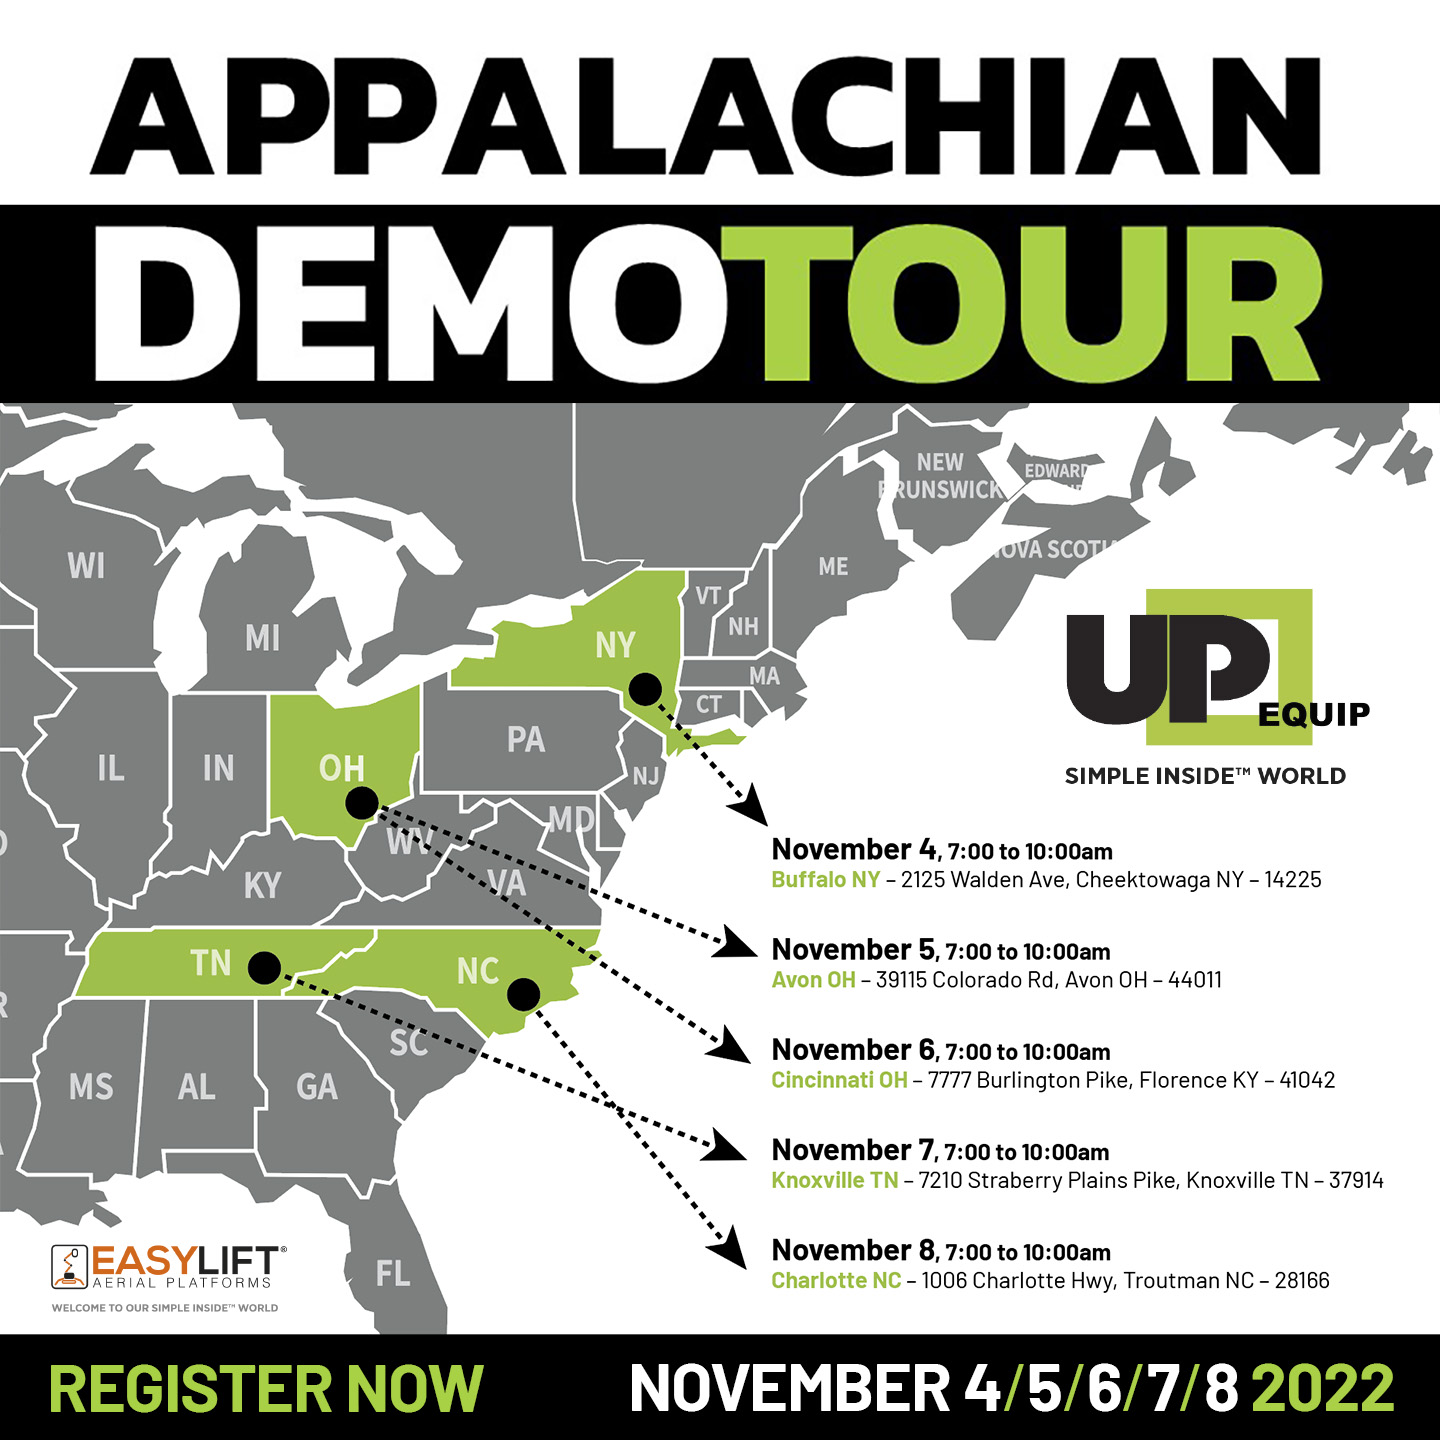 Appalachian Demo Tour and TCI EXPO 2022 for Easy Lift spiders!